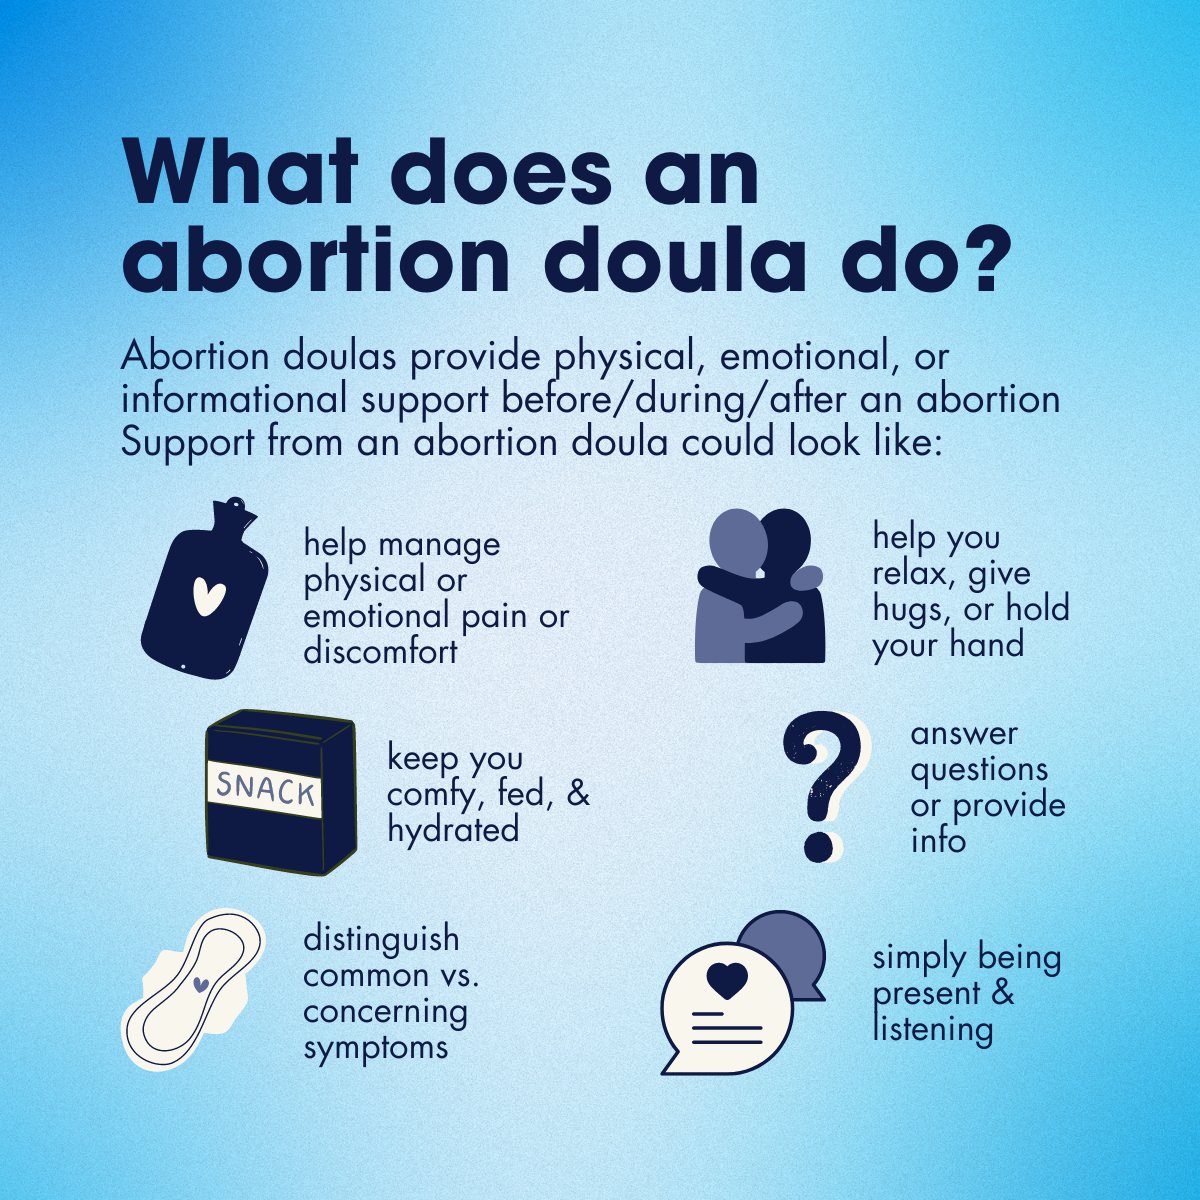 You might know about doulas, but what exactly do ABORTION doulas do? Basically, abortion doulas provide physical, emotional, & informational supports to folks before, during, or after their abortion!